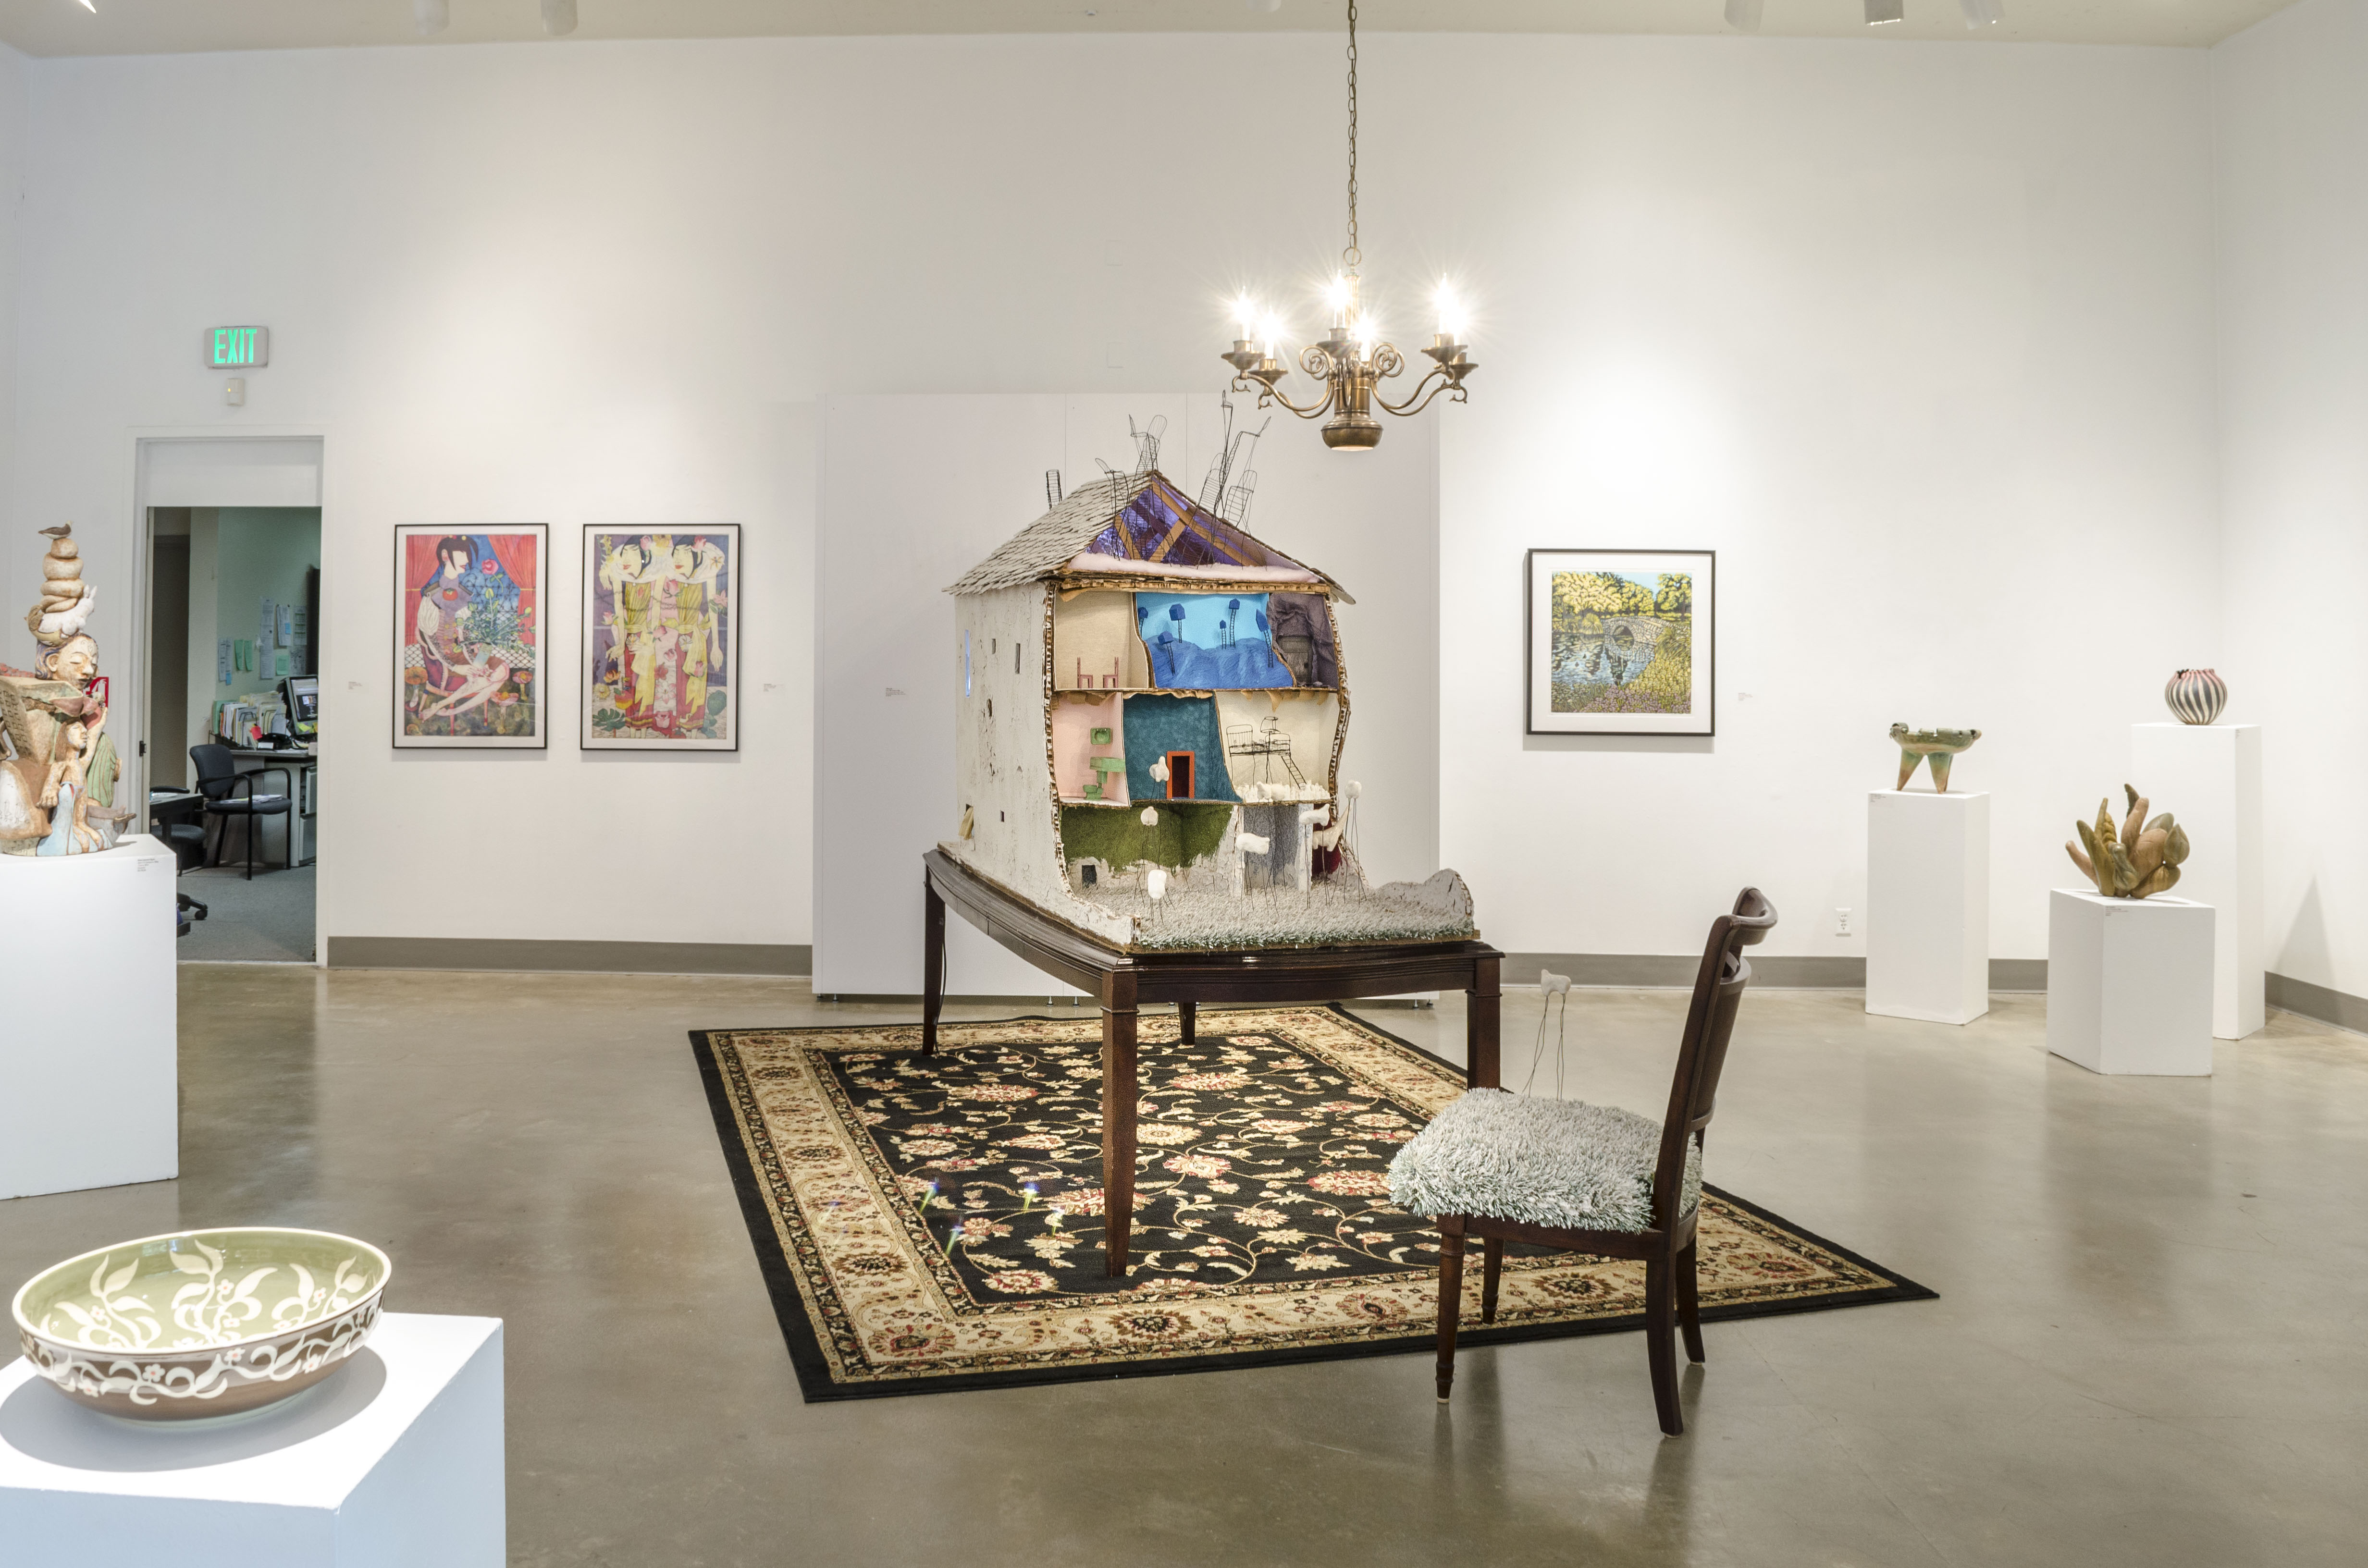 Installation View, Front West Gallery, Ink & Clay 40 Exhibition, Sept. 13, 2014 to Oct. 23, 2014.